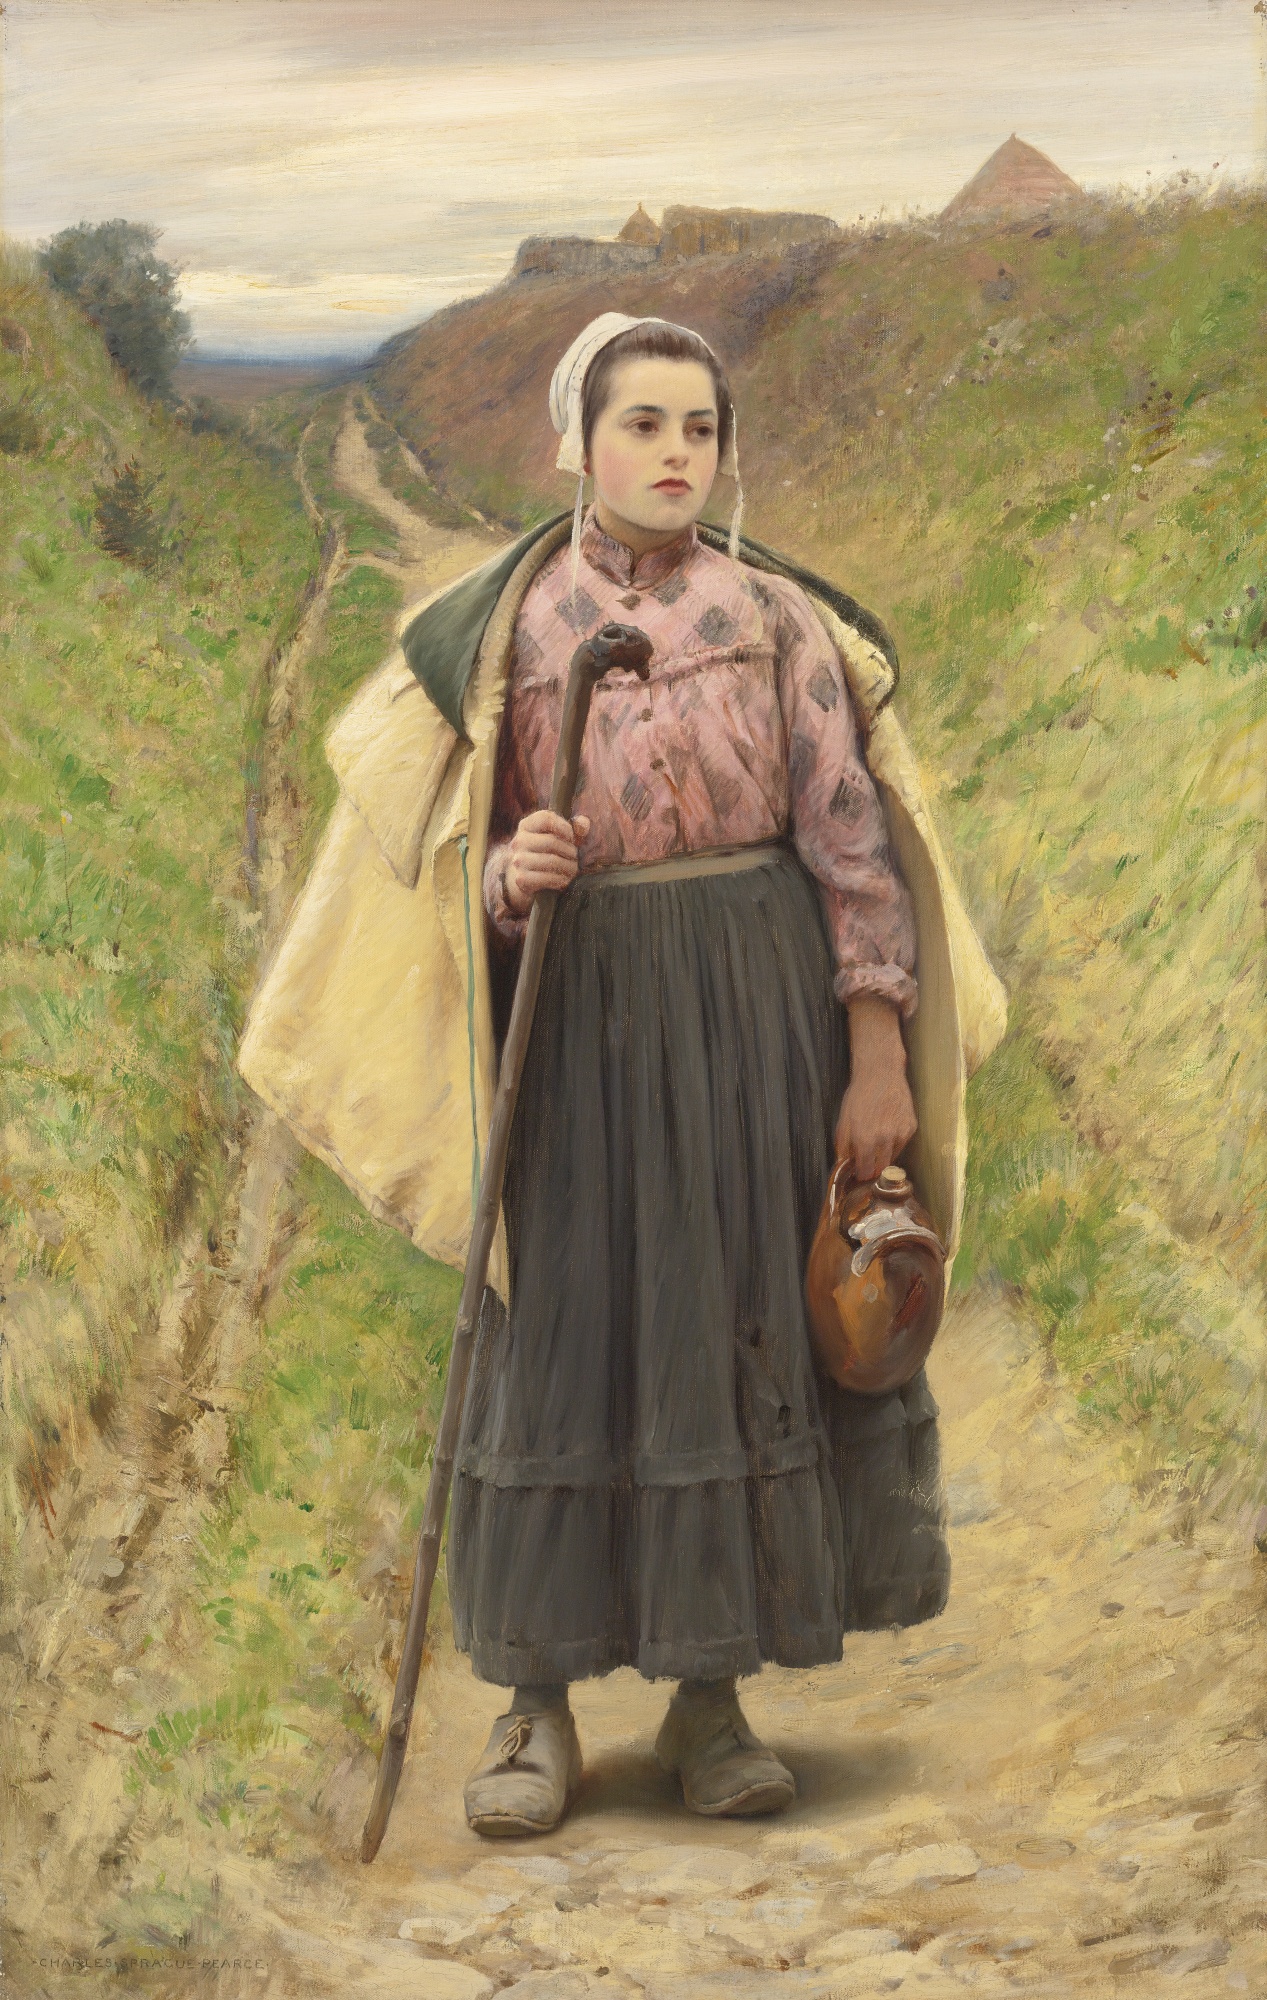 On the Path, by Charles Sprague Pearce